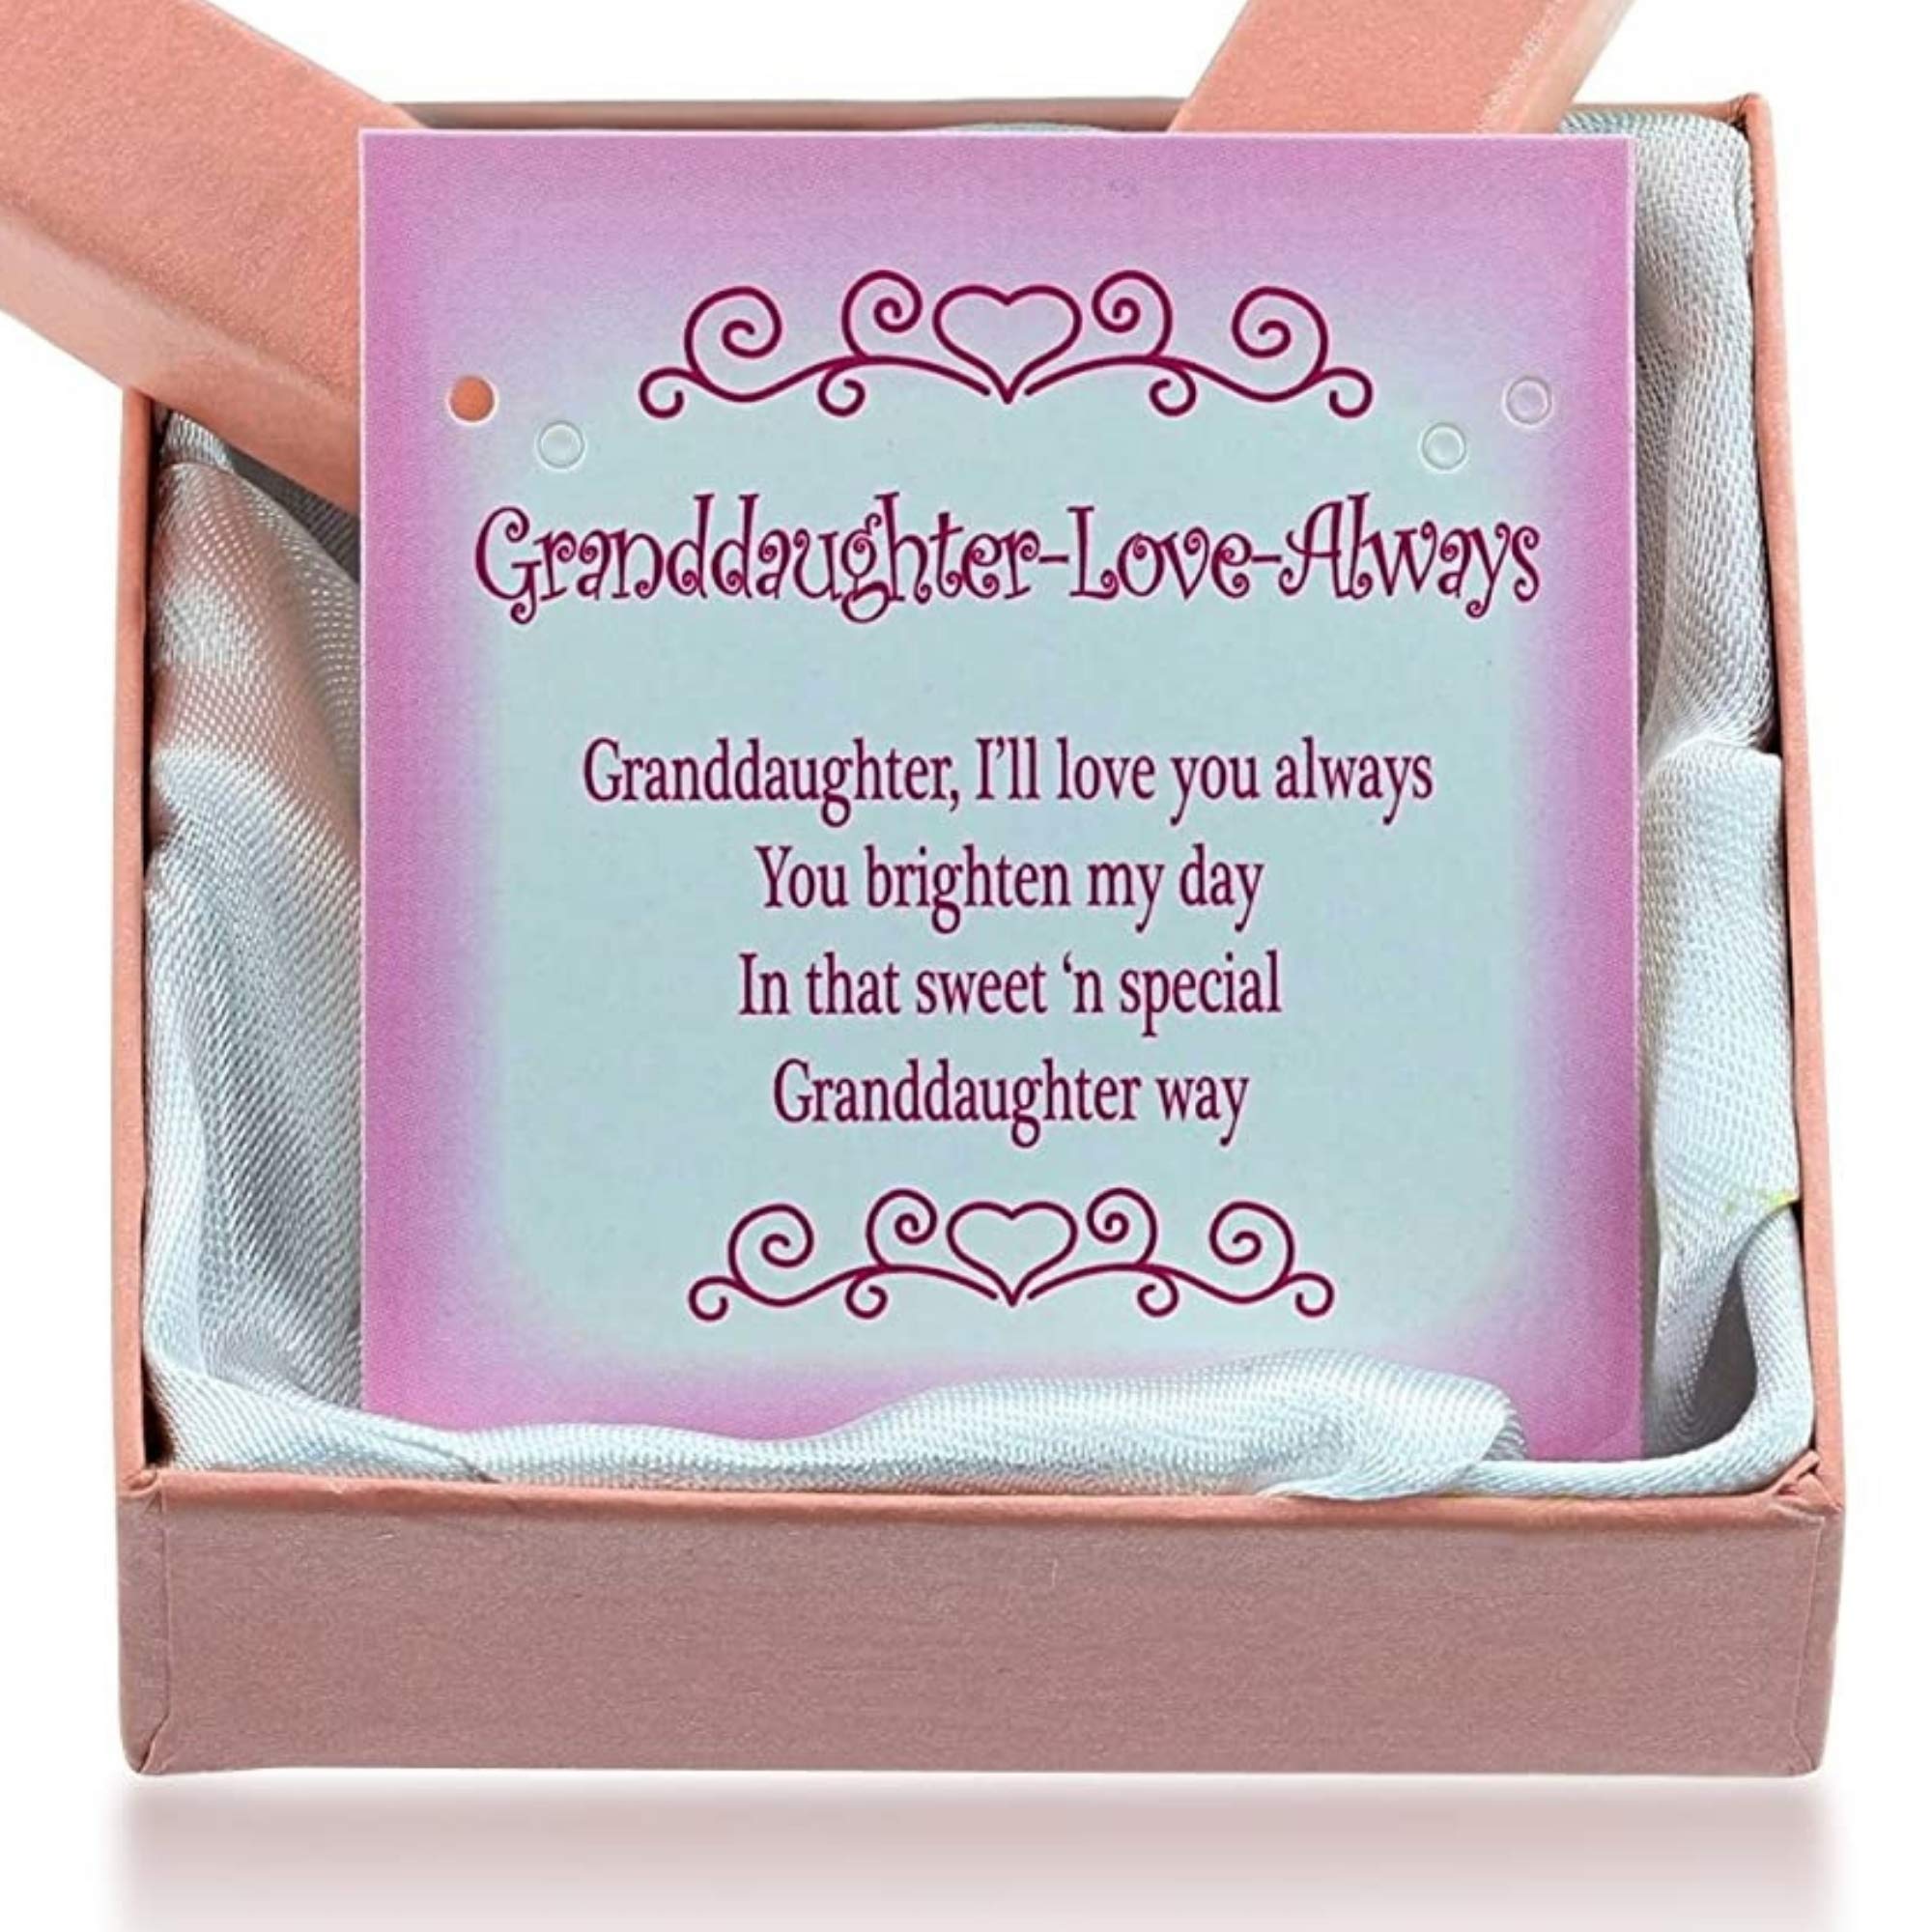 Beaux Bijoux Granddaughter Gift from Grandma and Grandpa | Stretch Heart Charm Bracelet for Girls | Gift Boxed with Sentimental Card | Love Granddaughter Always Love Message